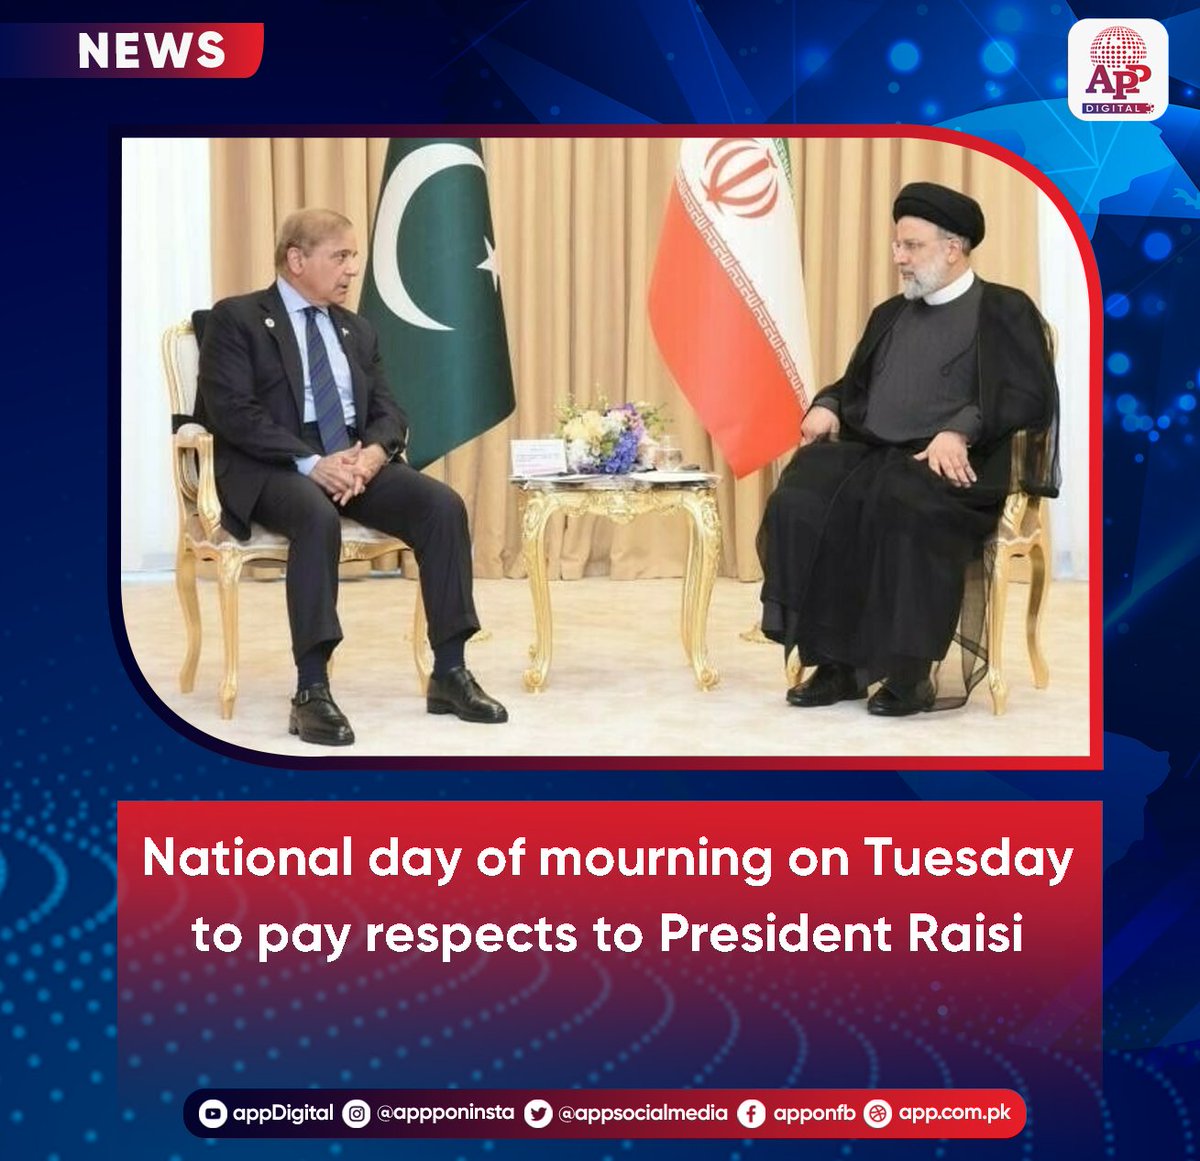 Prime Minister Muhammad Shehbaz Sharif has declared a day of national mourning in Pakistan on Tuesday to pay respects to Iranian President Ebrahim Raisi and other dignitaries who passed away in a helicopter crash. #Pakistan #Iran #PMShehbazSharif